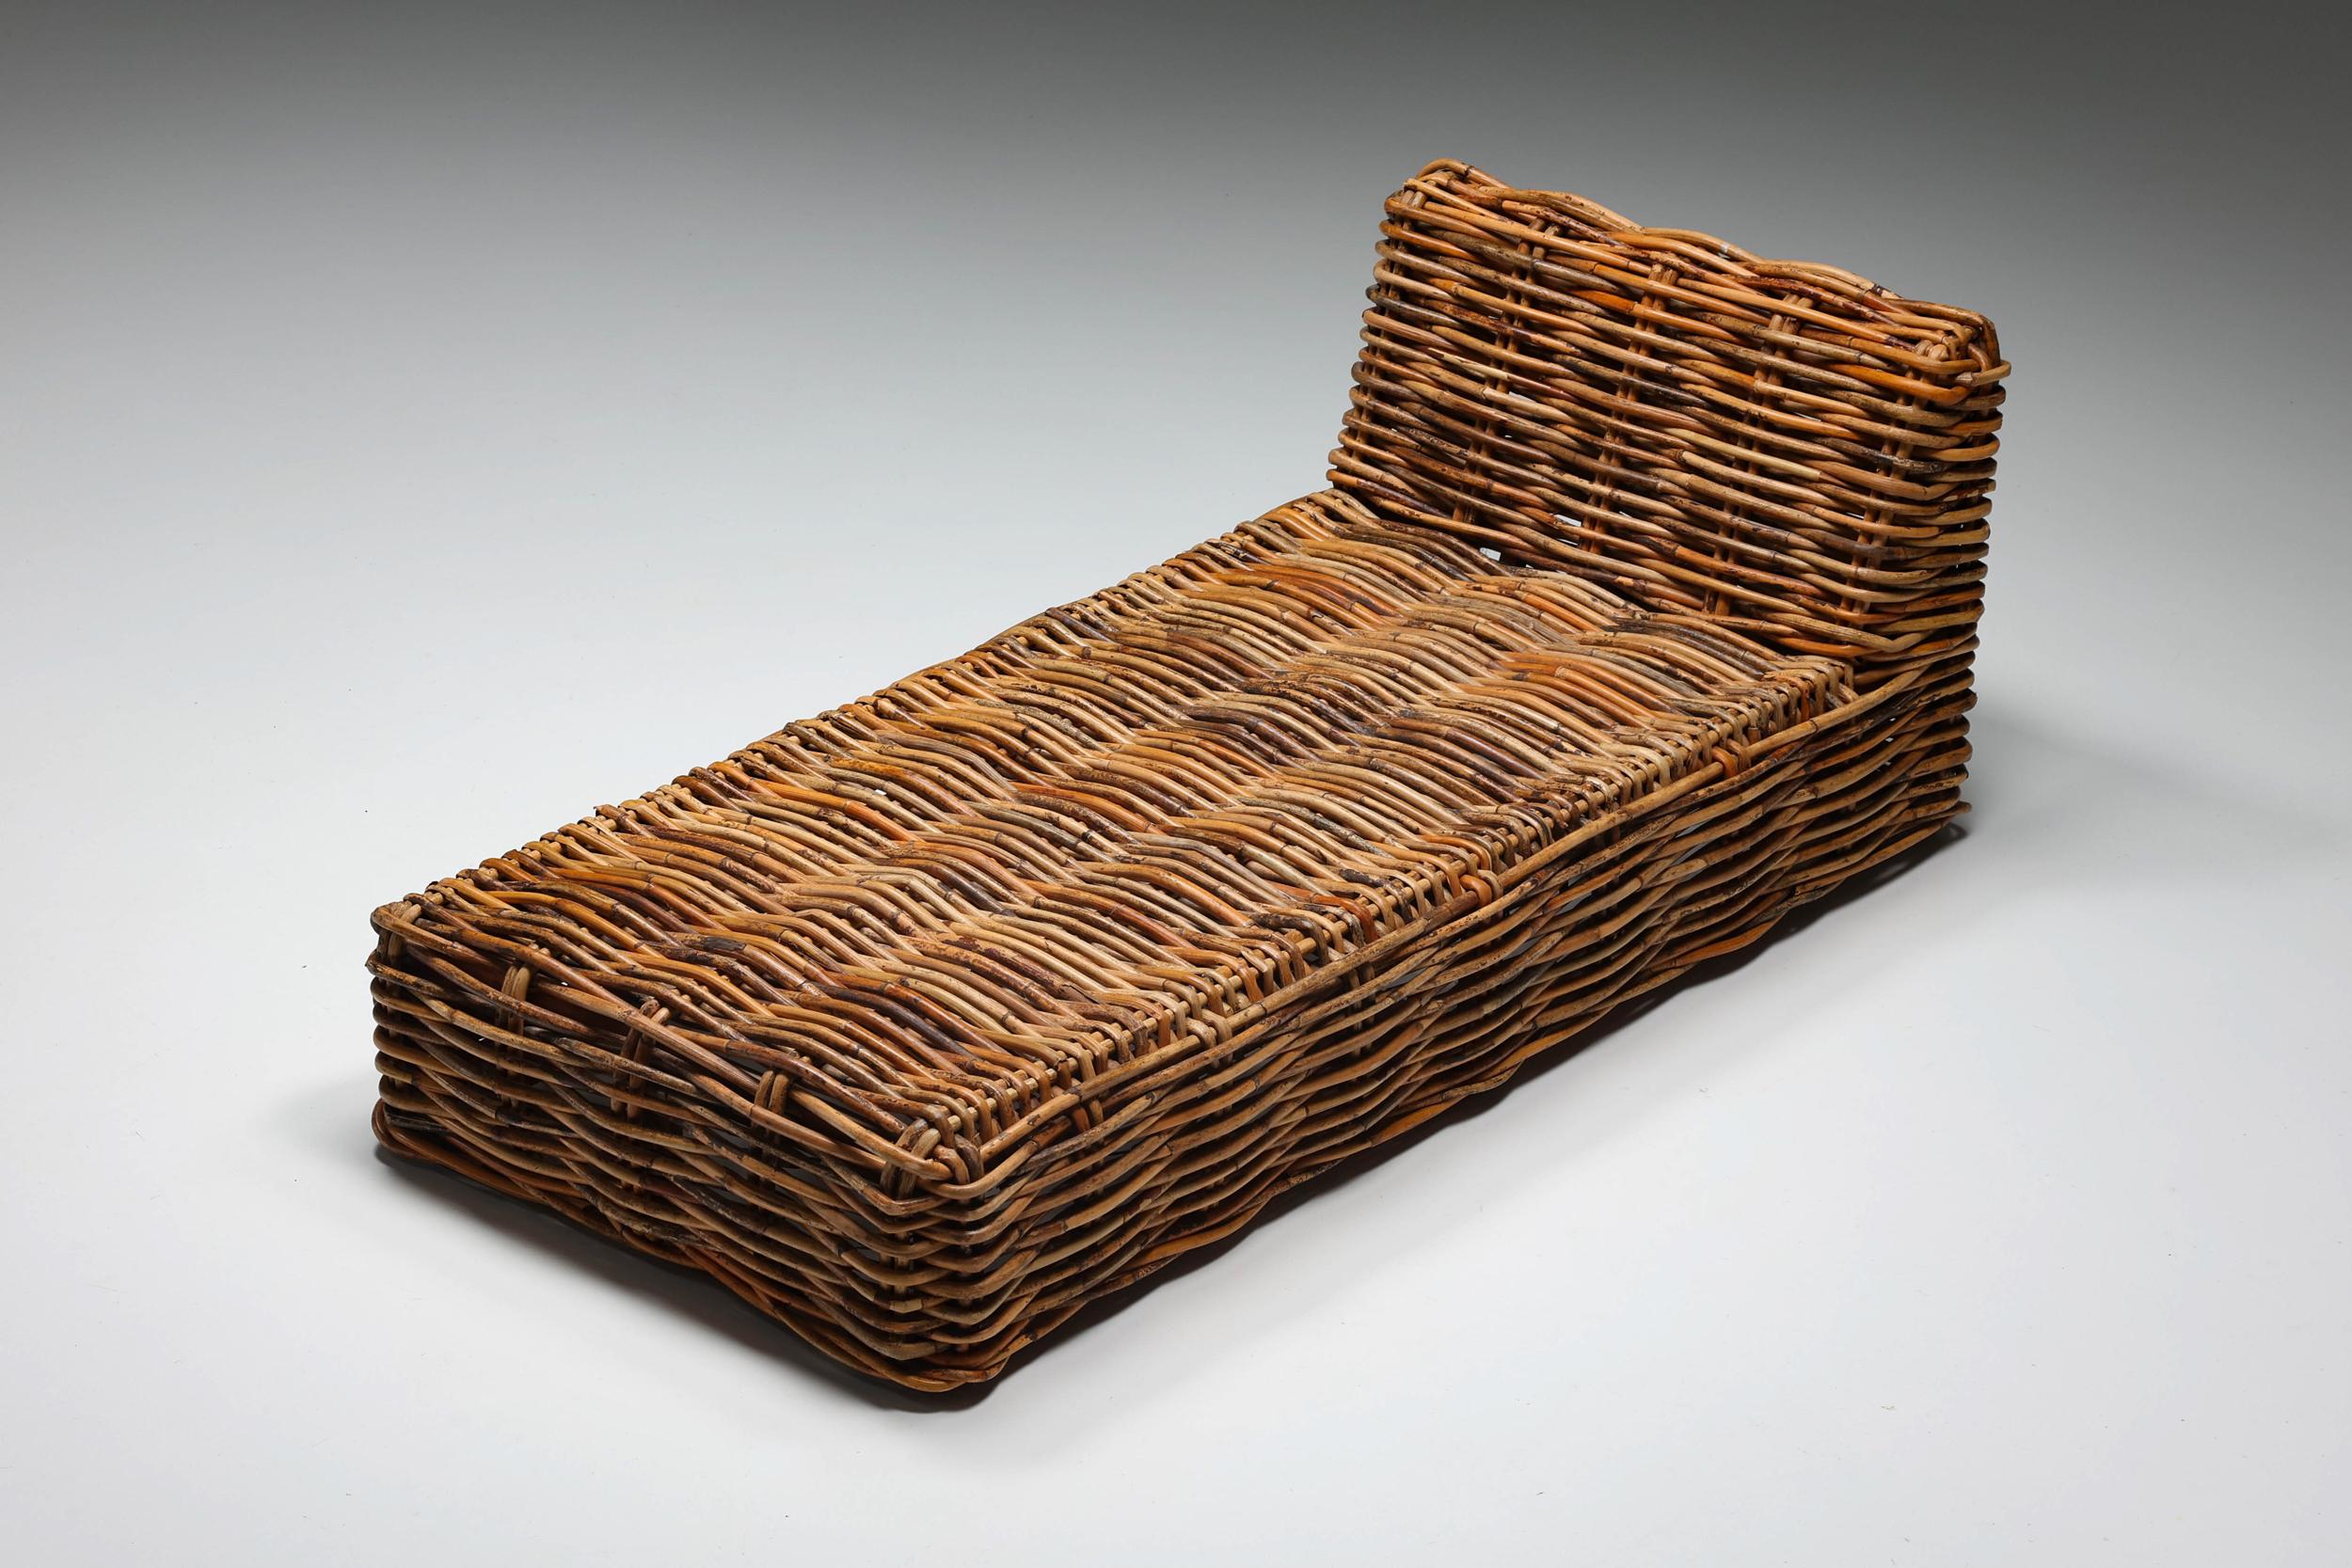 Italian Rattan Day Bed, Chaise Longues, 1960's, Mid-Century Modern